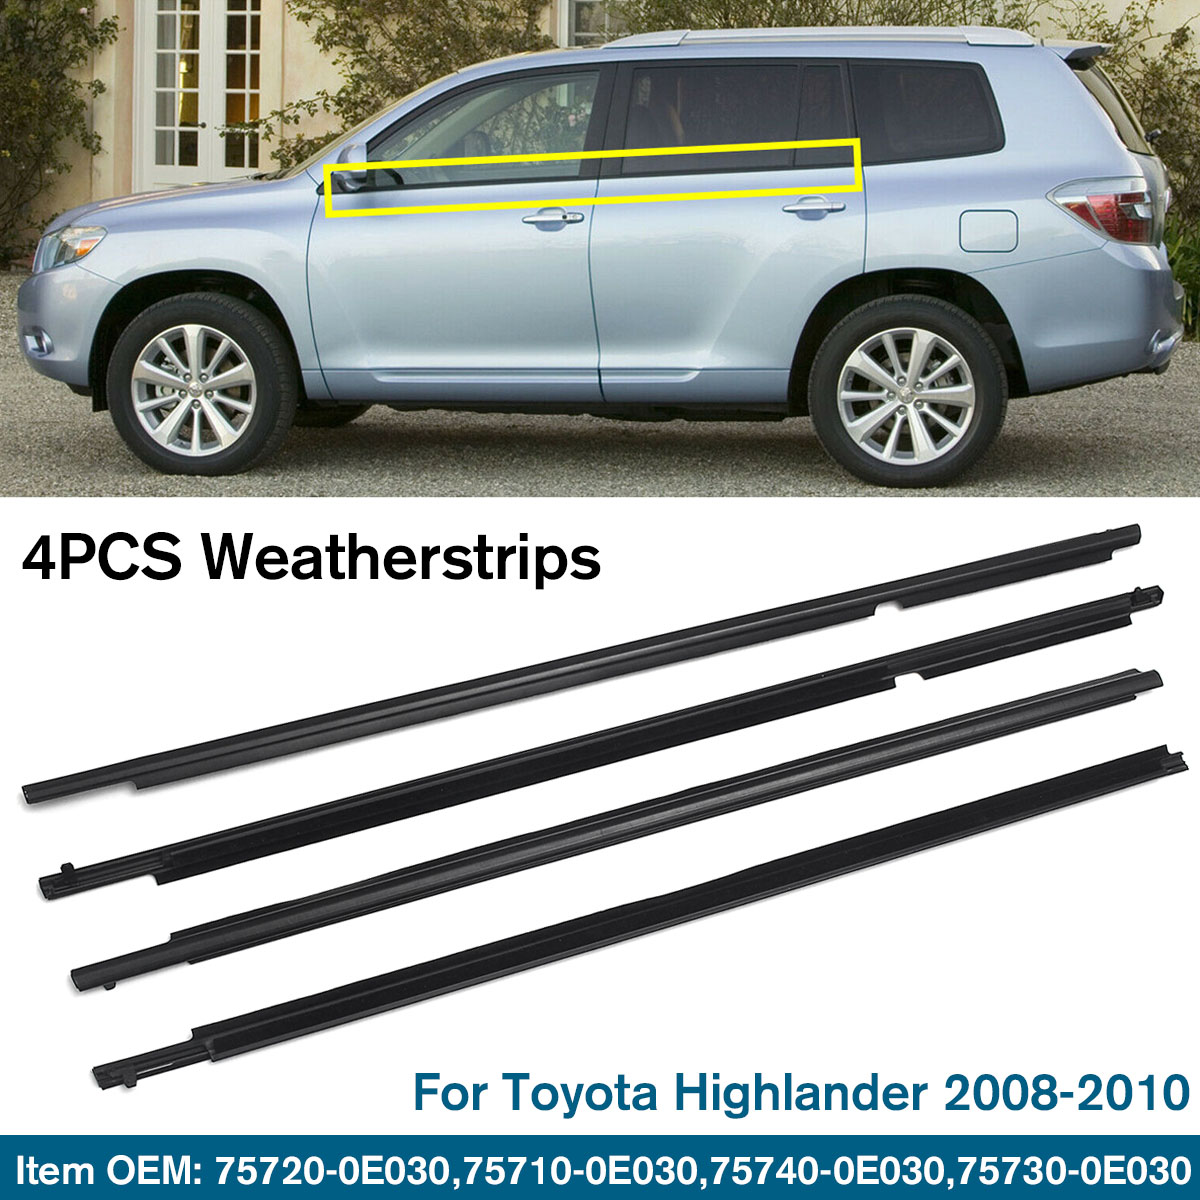 Details about   For Highlander 2008-2013 Window Weatherstrip Molding Sill Belt 4PC Chrome